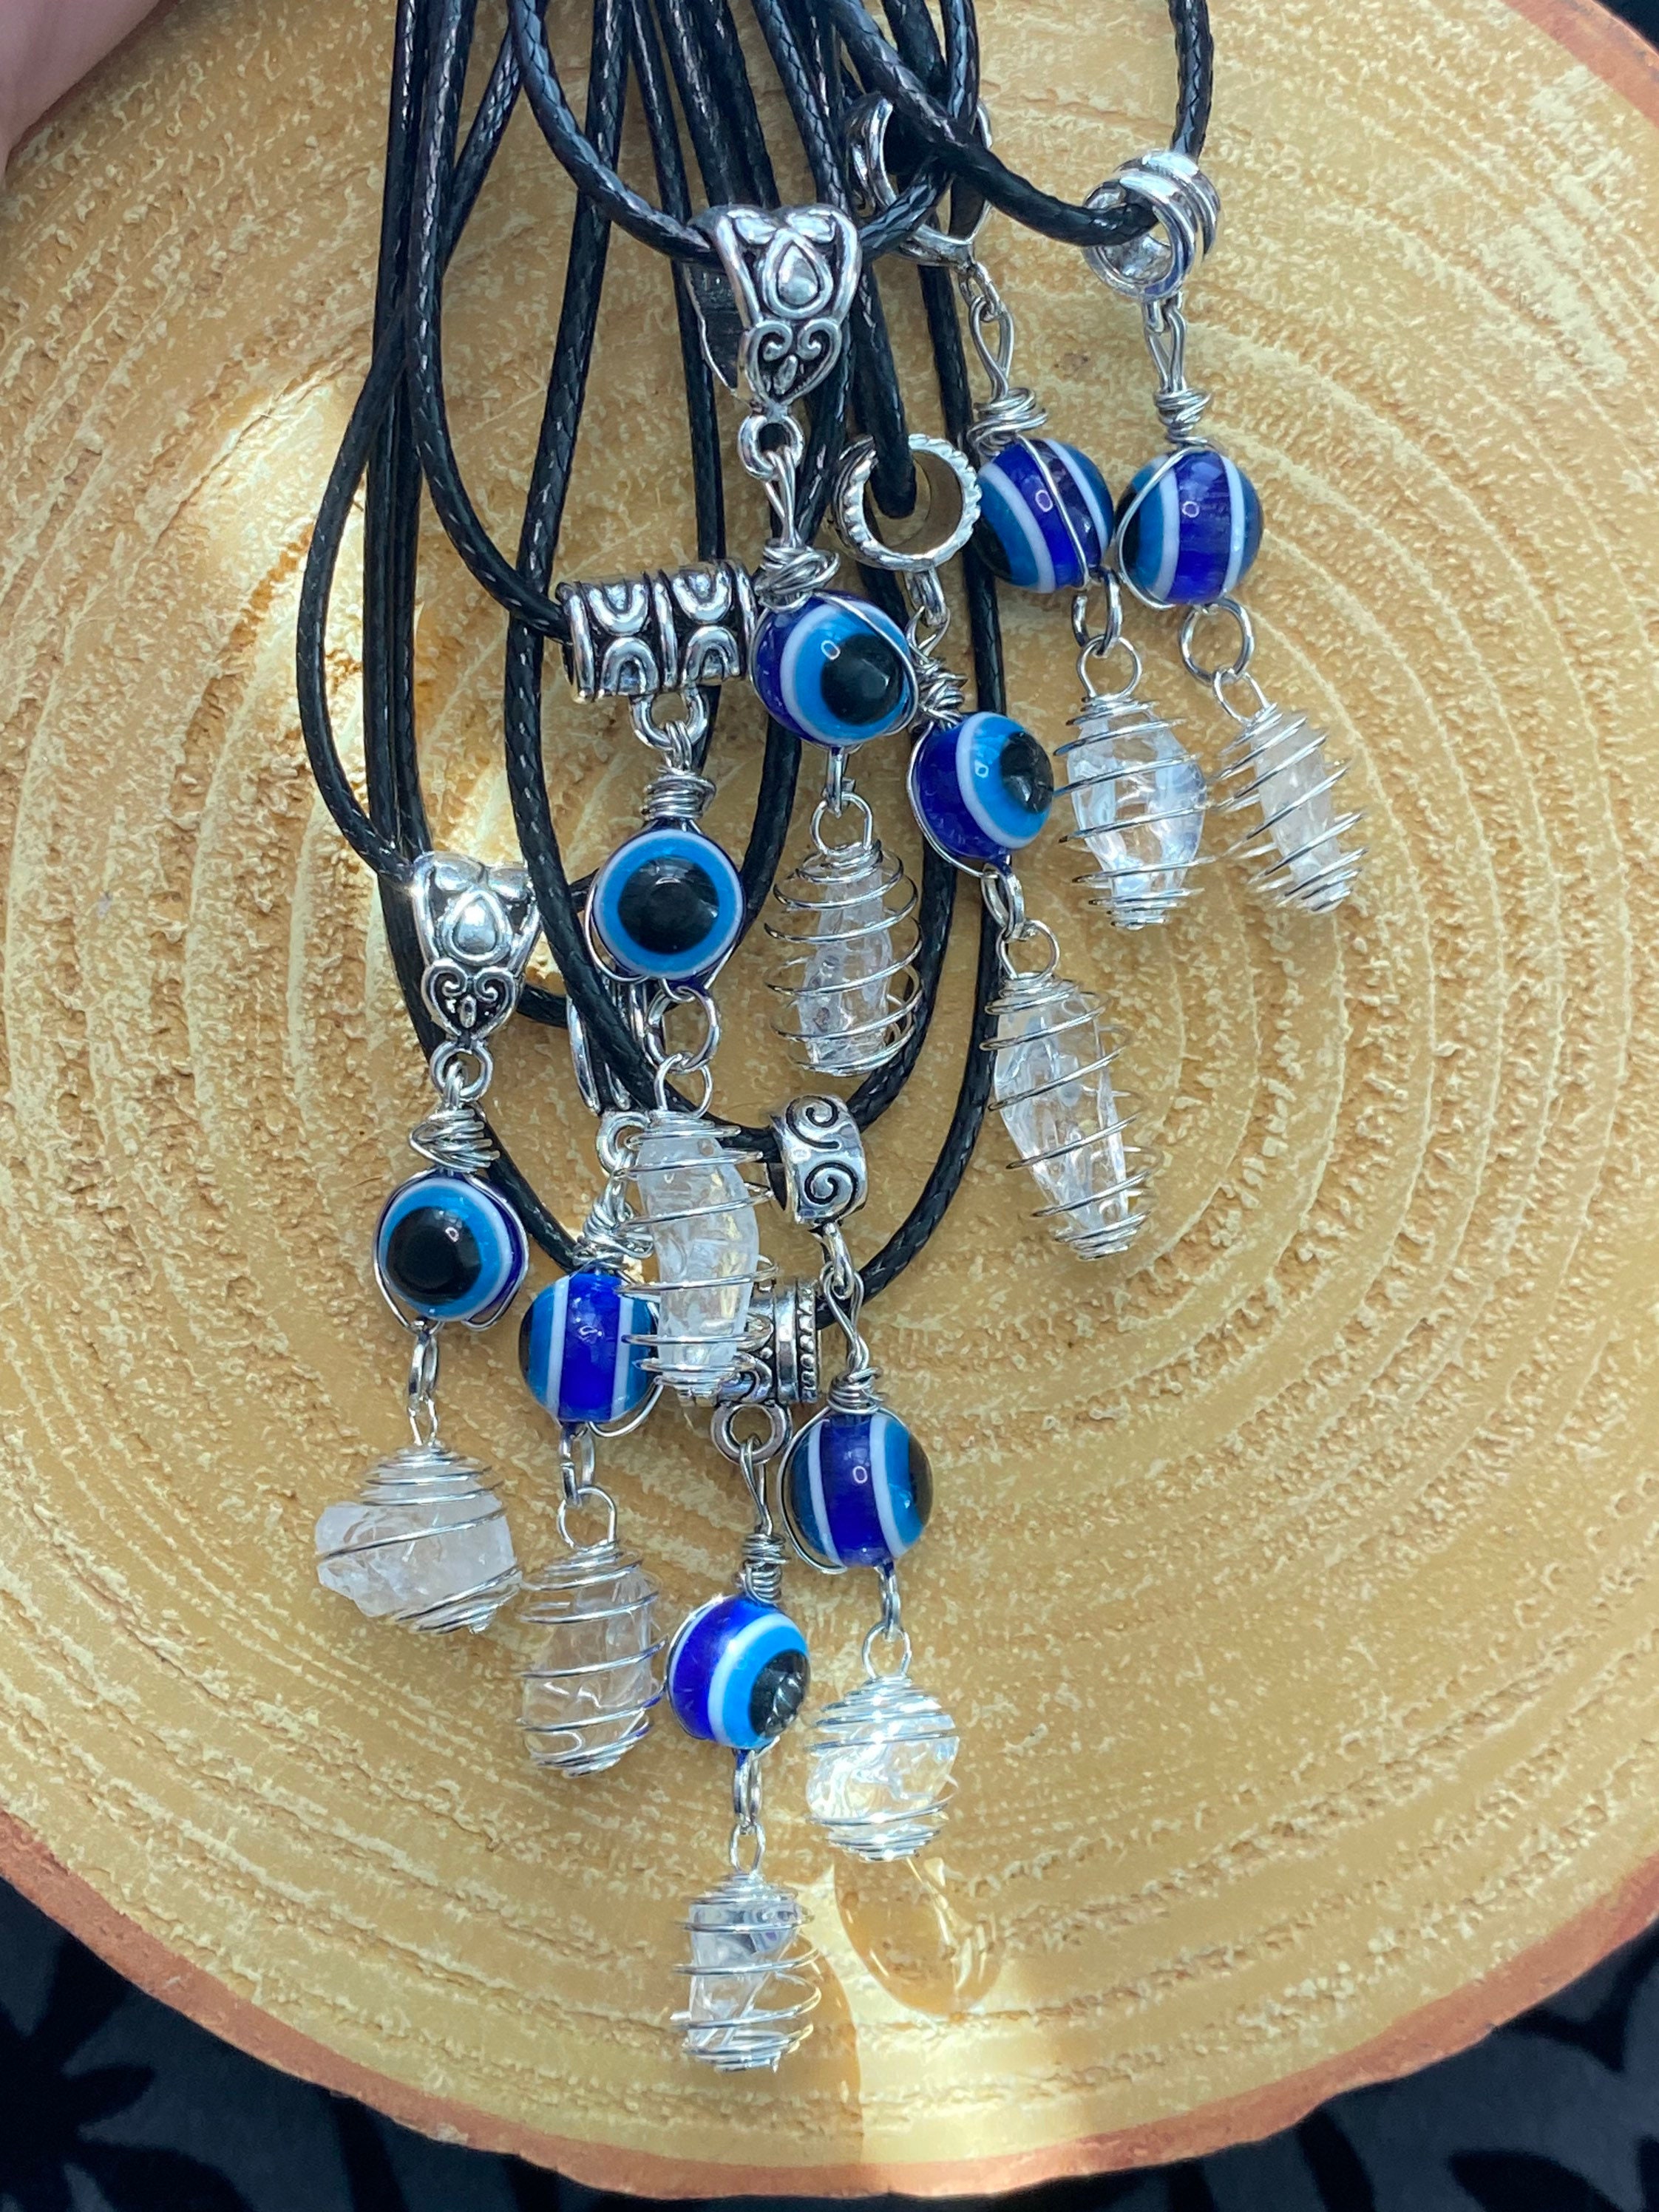 Healing Crystal Pendant Necklace  Natural Stone Necklace $5.98 – Soul  Charms